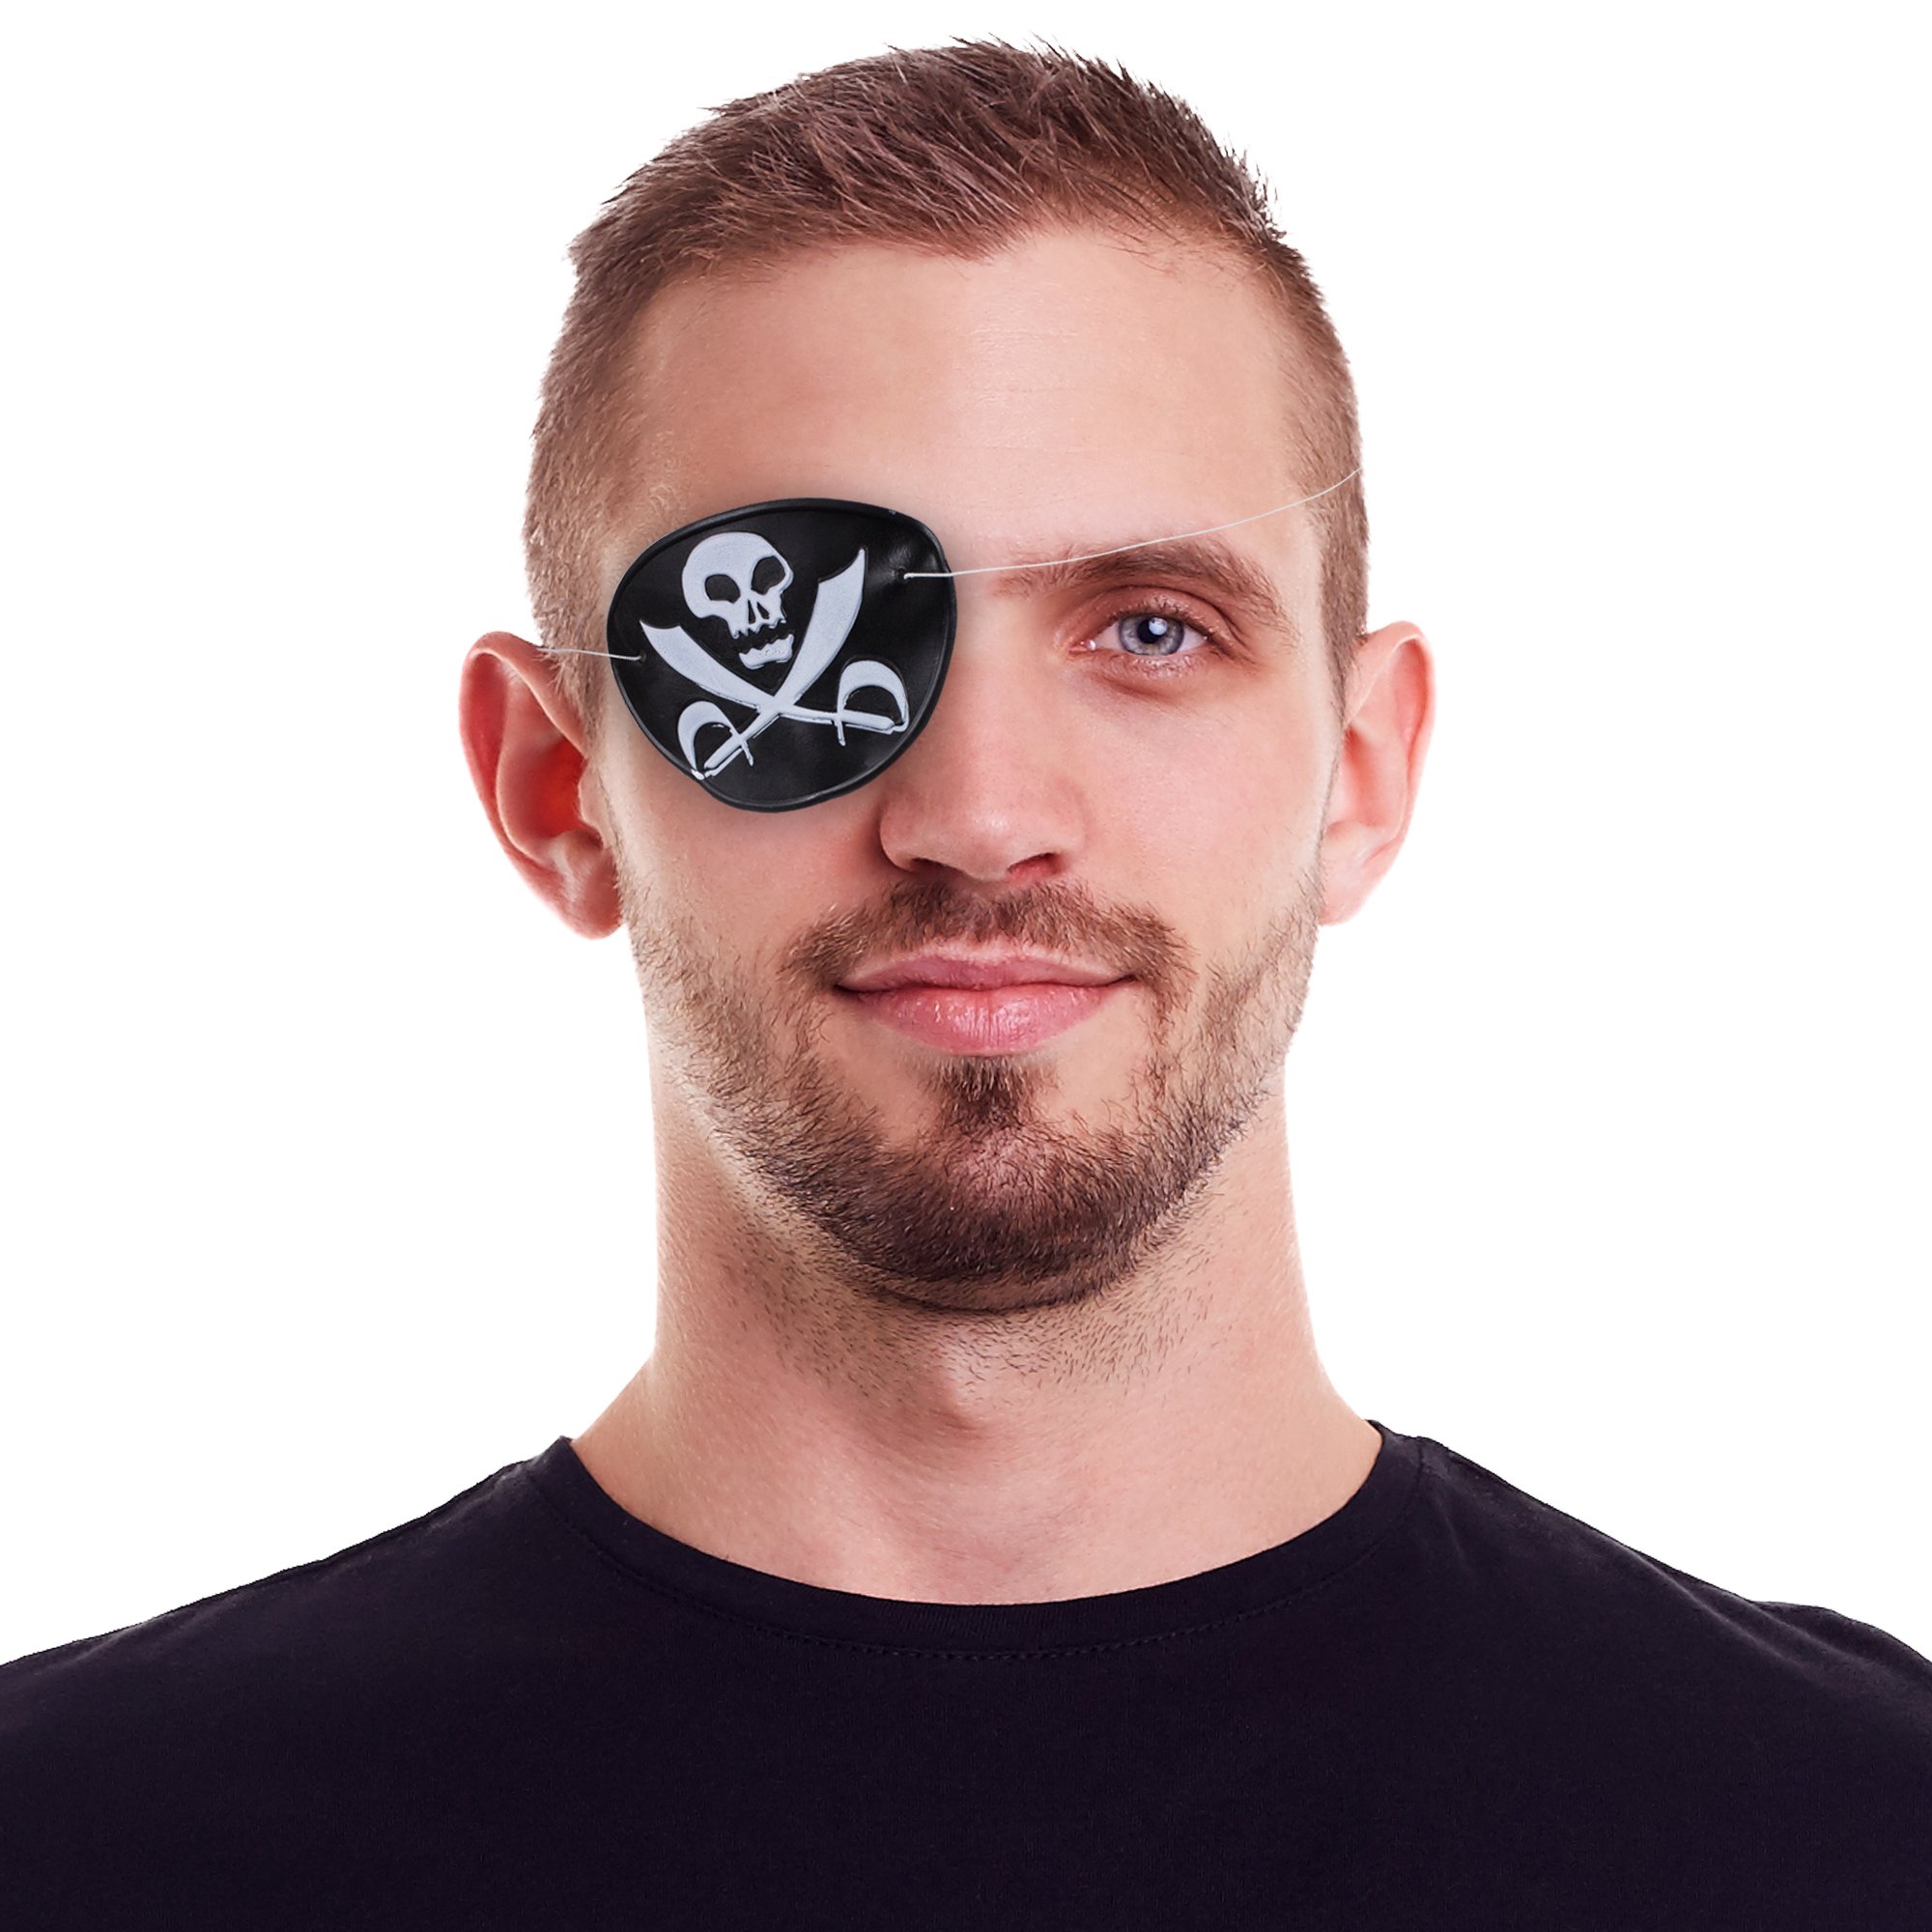 US Toy Company 1029 Pirate Eye Patches